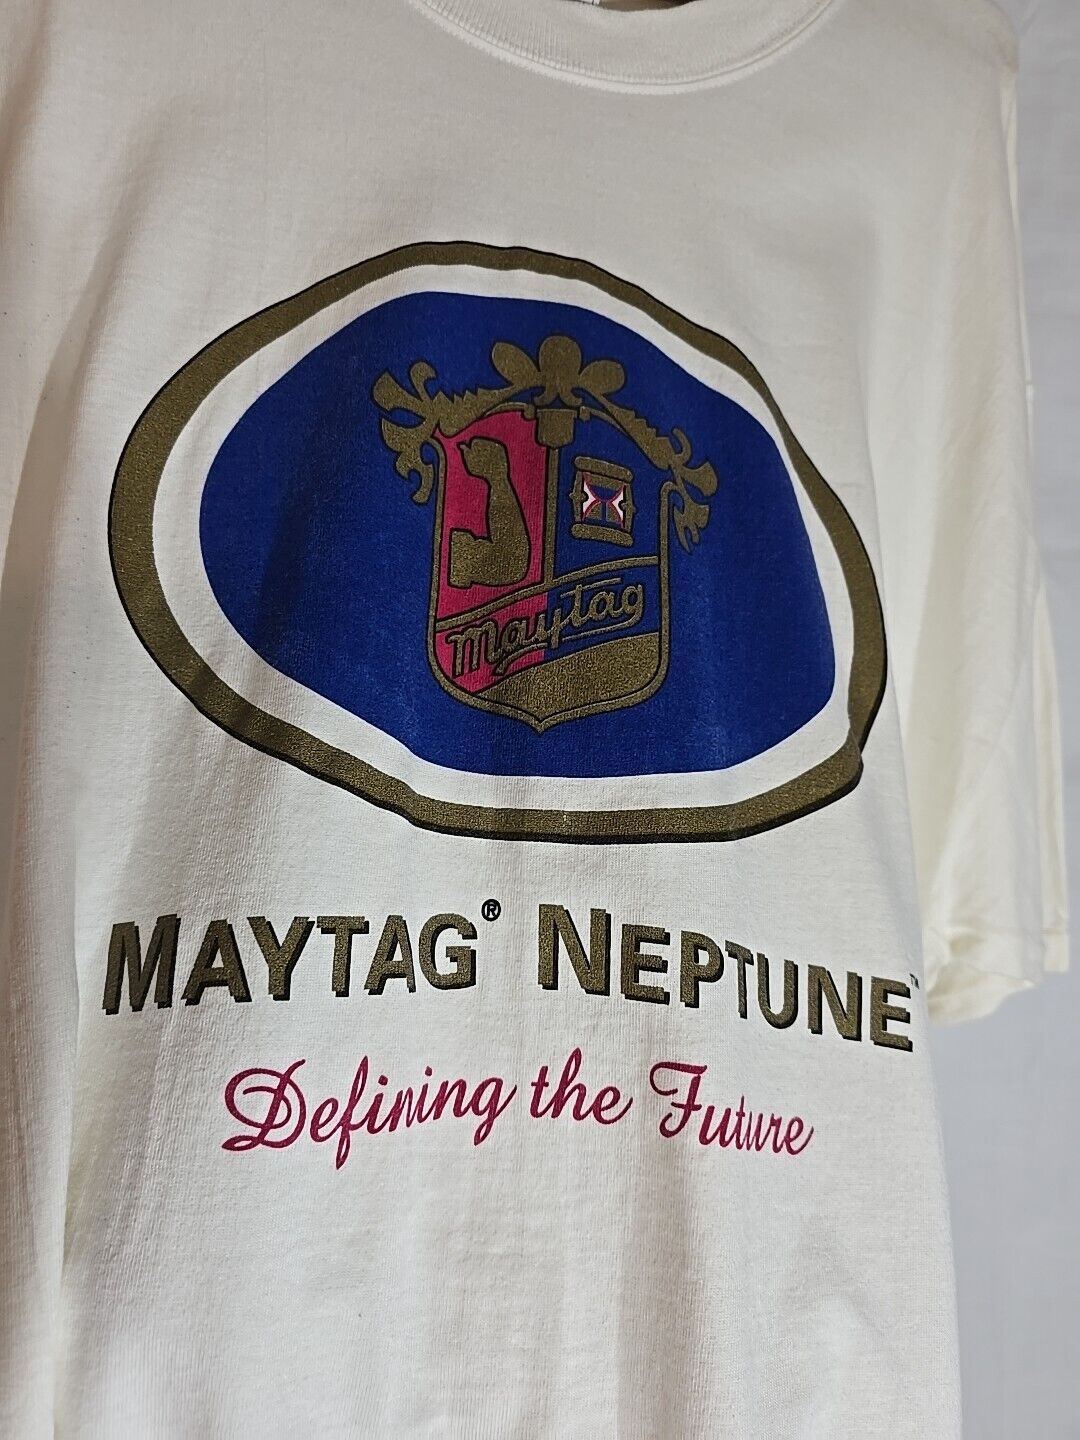 Vintage Authentic Maytag T Shirt size XL